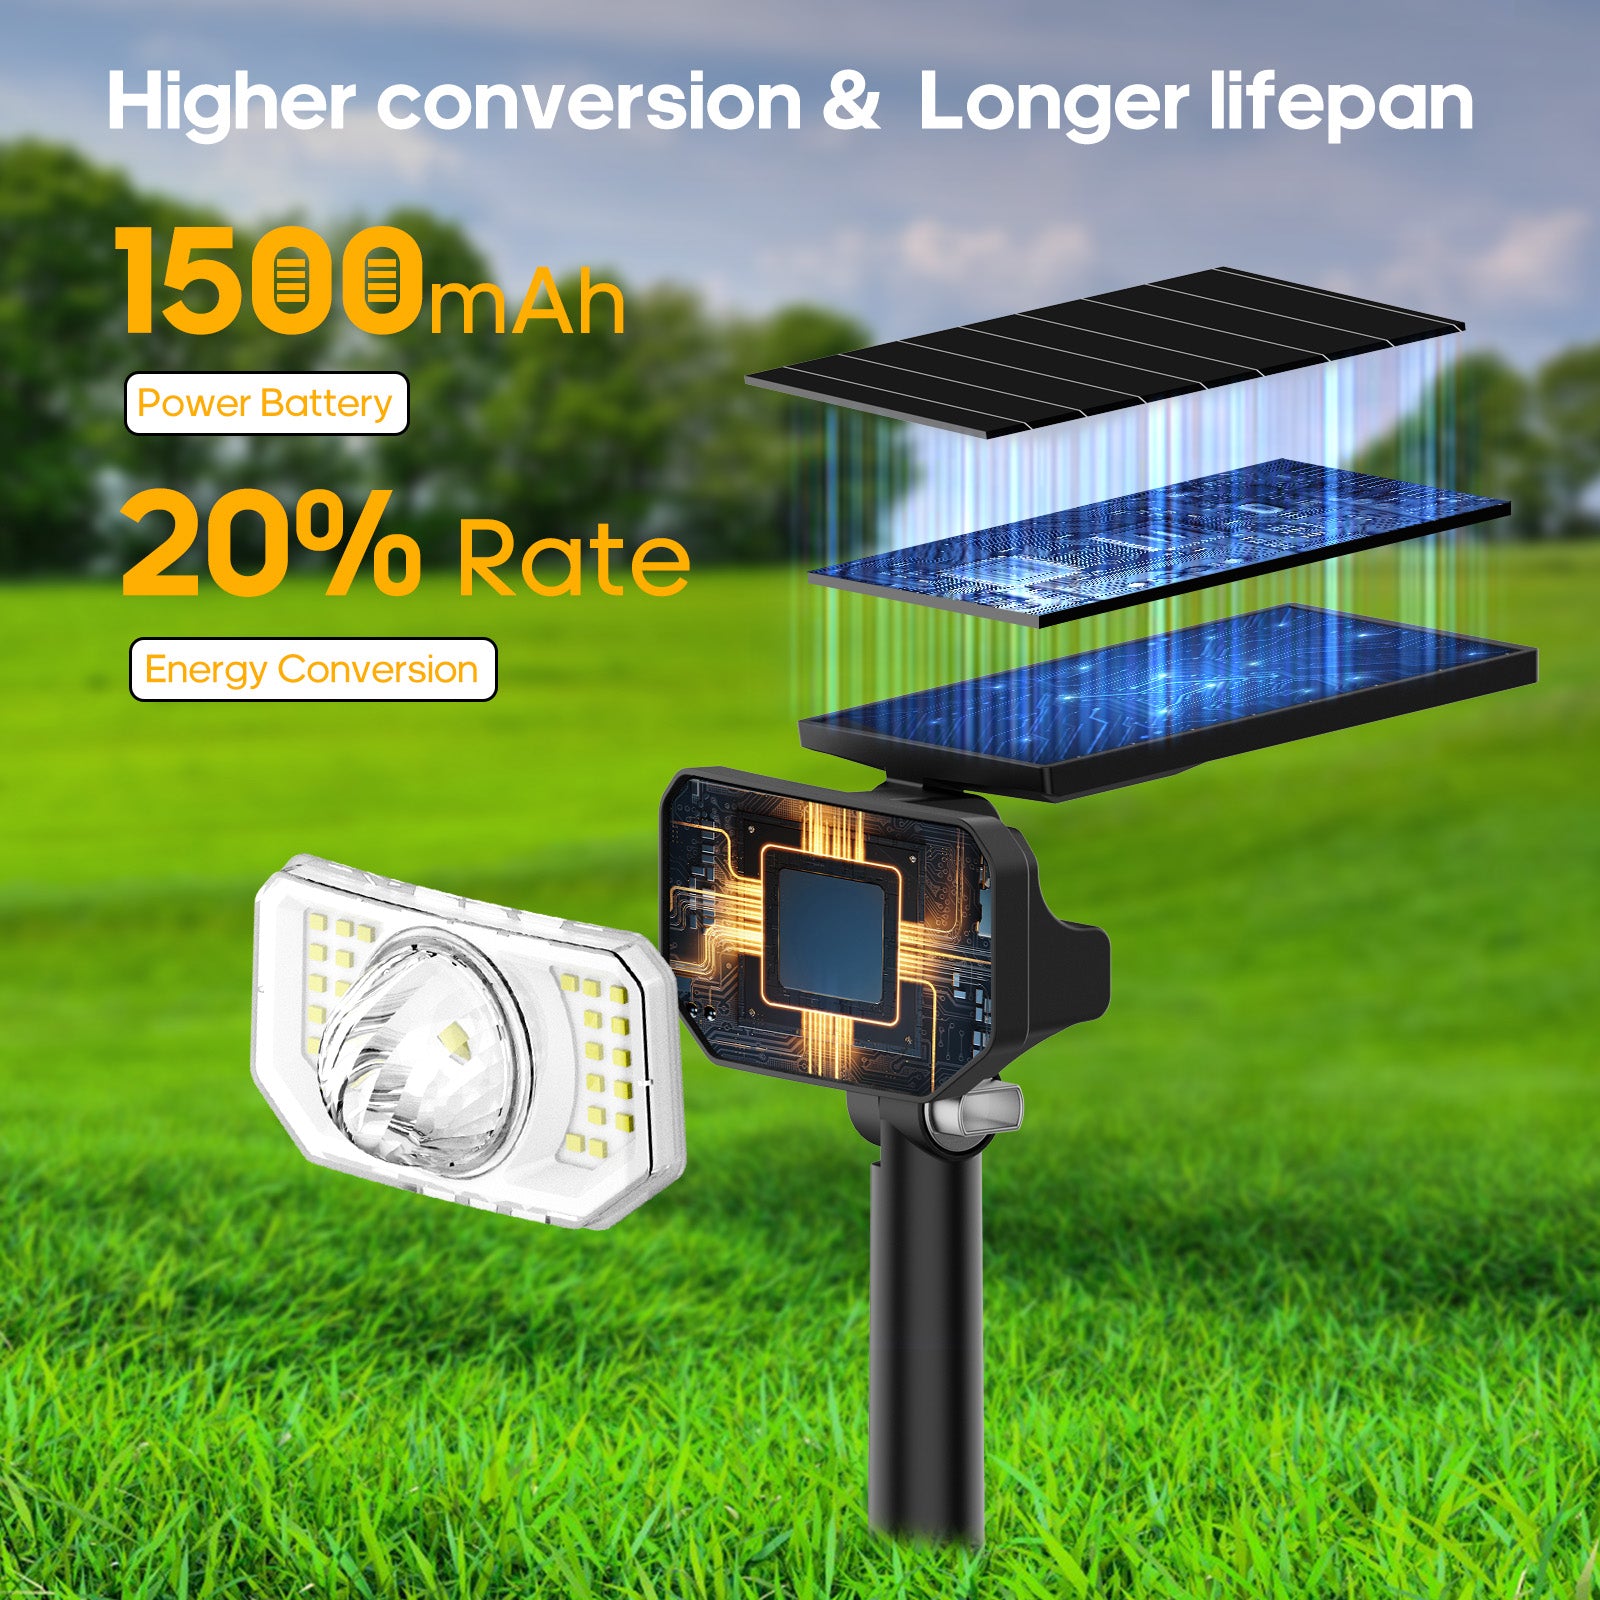 Solar Spotlights Outdoor, 26 LED RGB/Warm White Color Changing Landscape Path Lights, Auto On/Off Solar Powered Path Lights, IP65 Waterproof Outdoor Lights, 2 Pack OL007